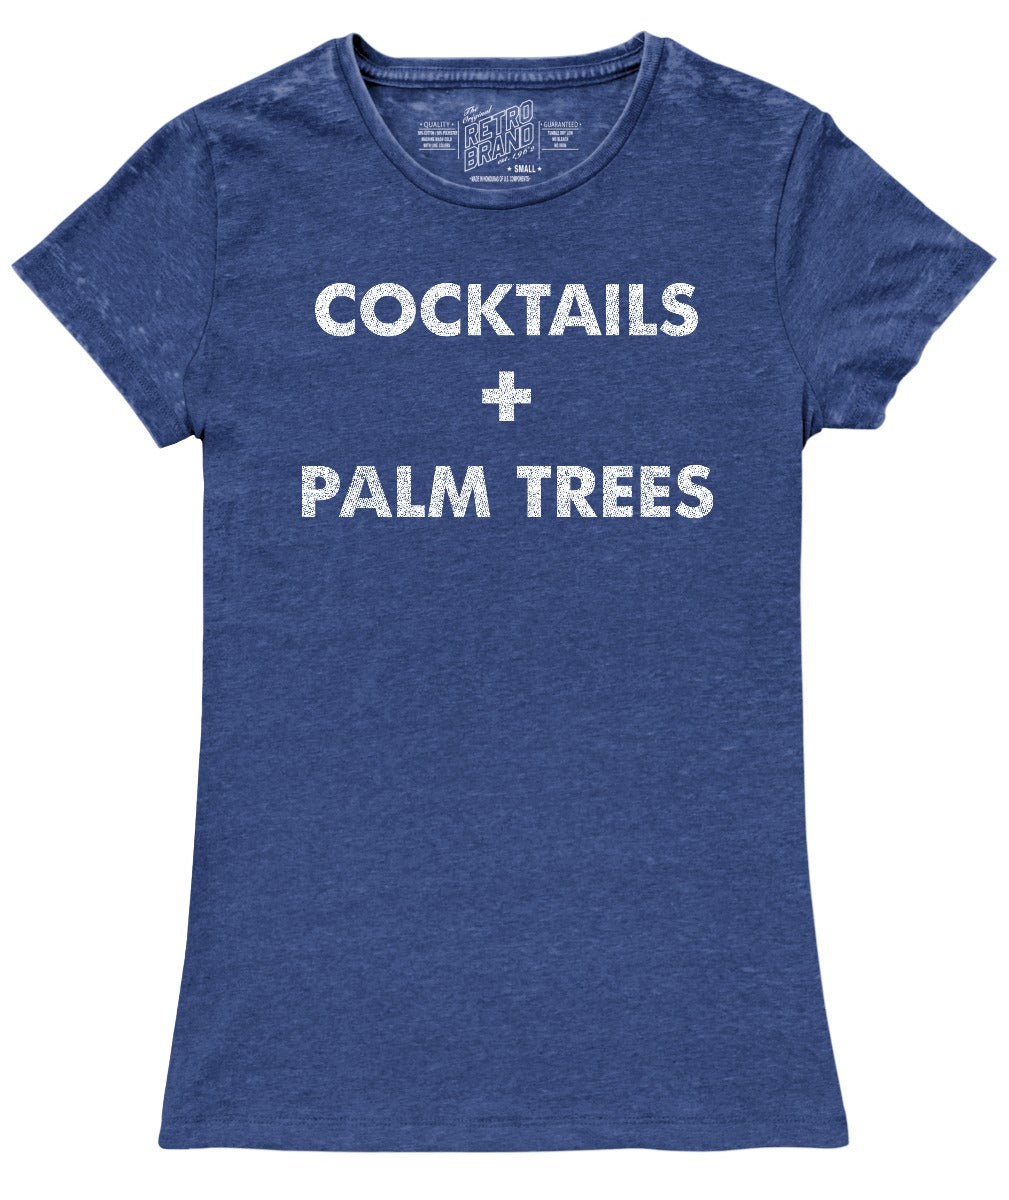 Cocktails & Palm Trees 100% Cotton Women's Tee